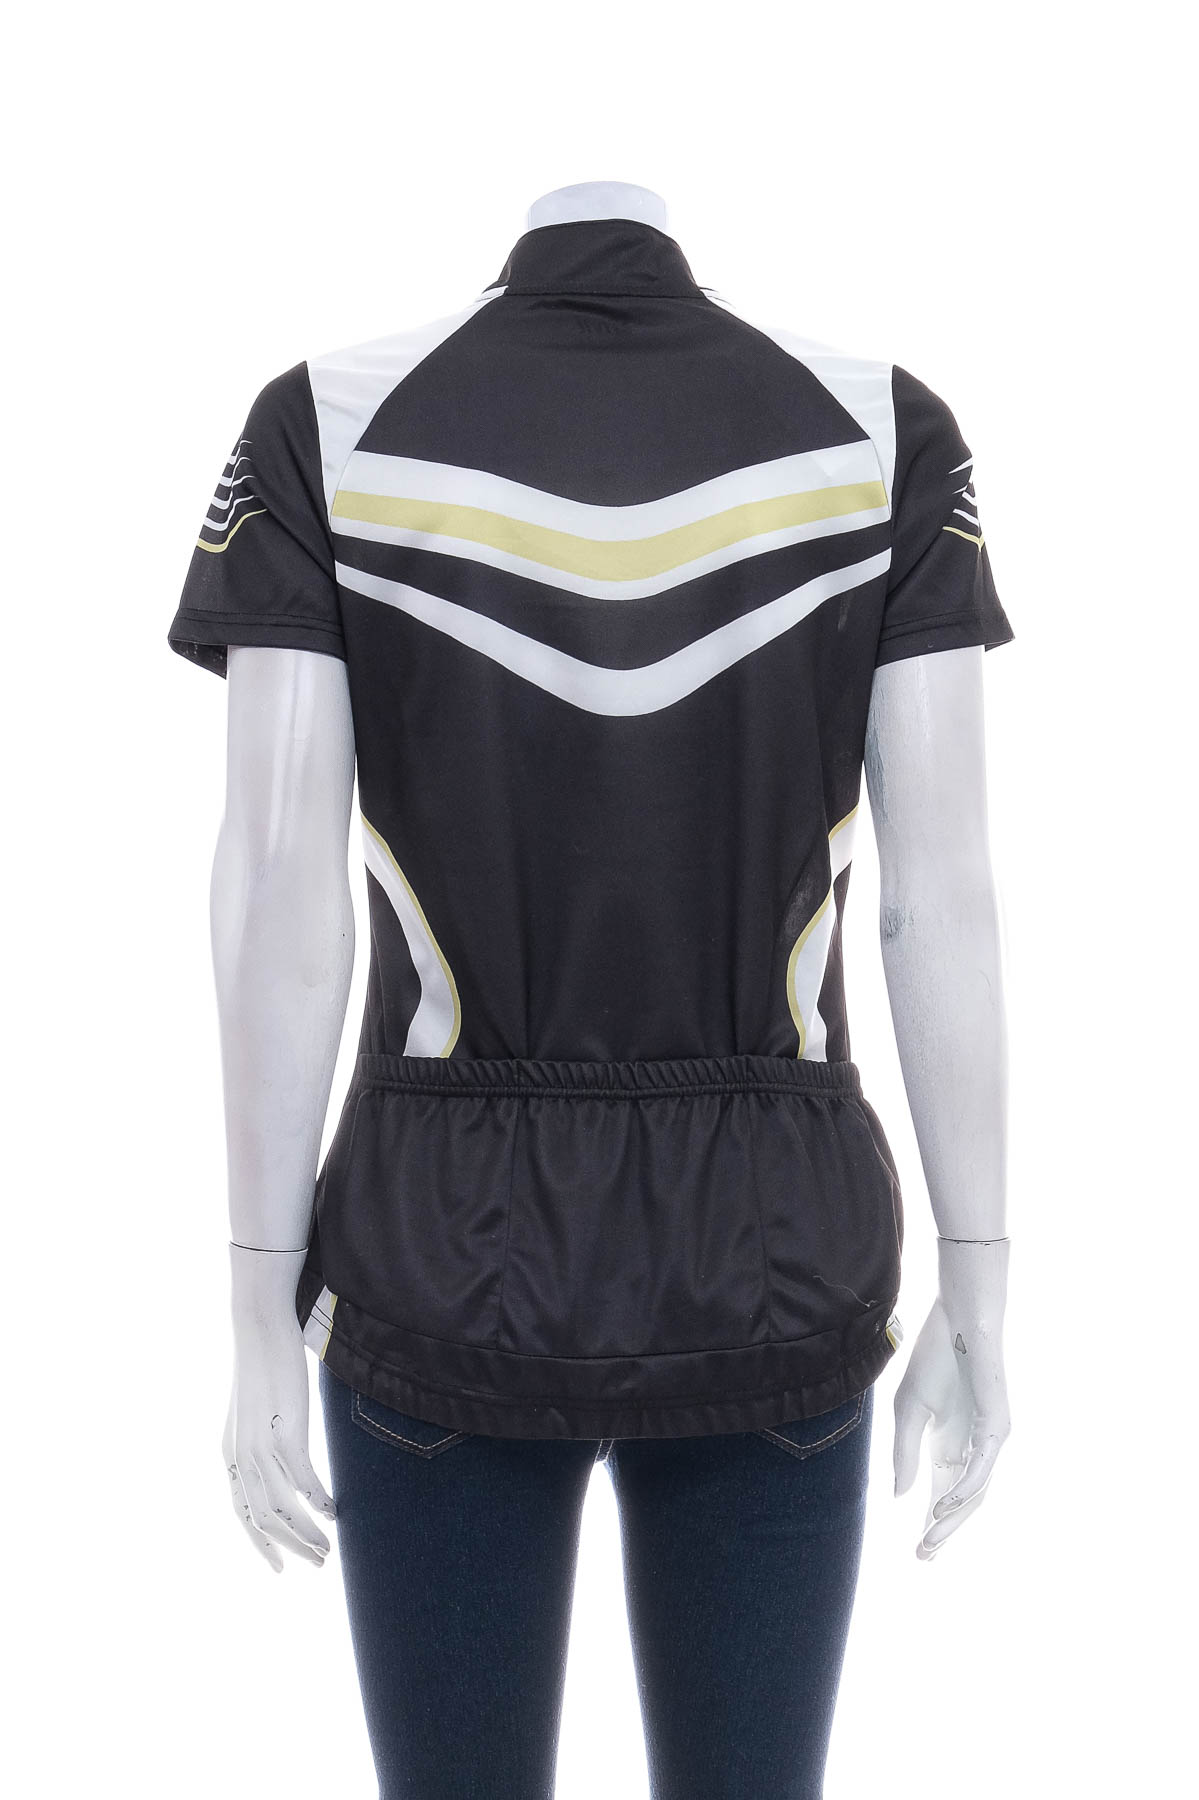 Female sports top for cycling - Crivit - 1